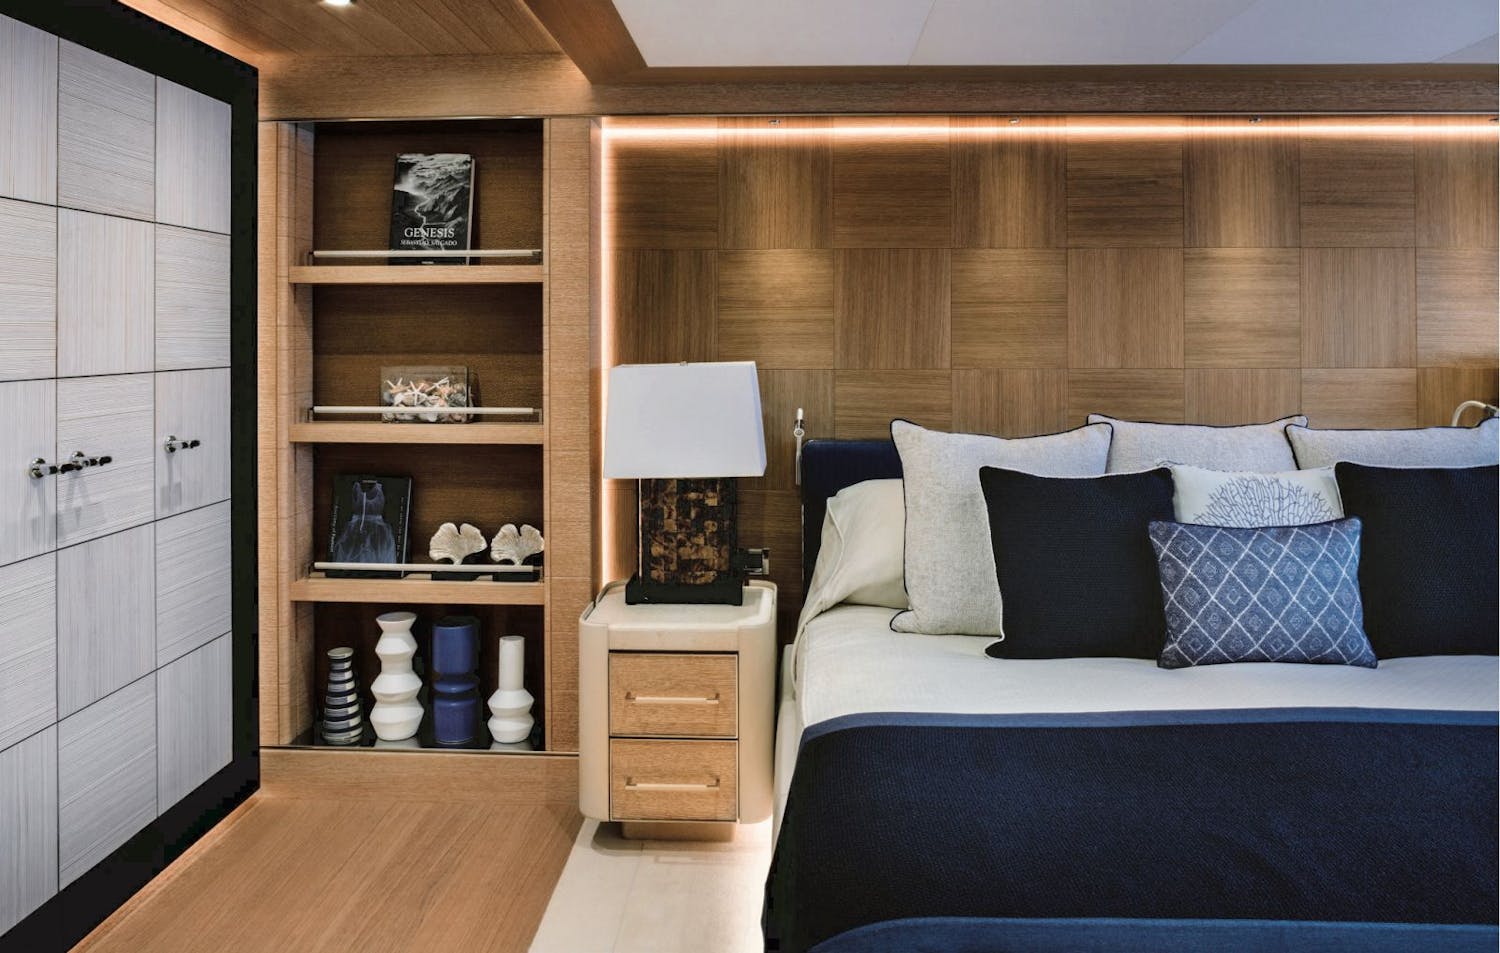 Cabin bed, side table, book shelf and closet. >